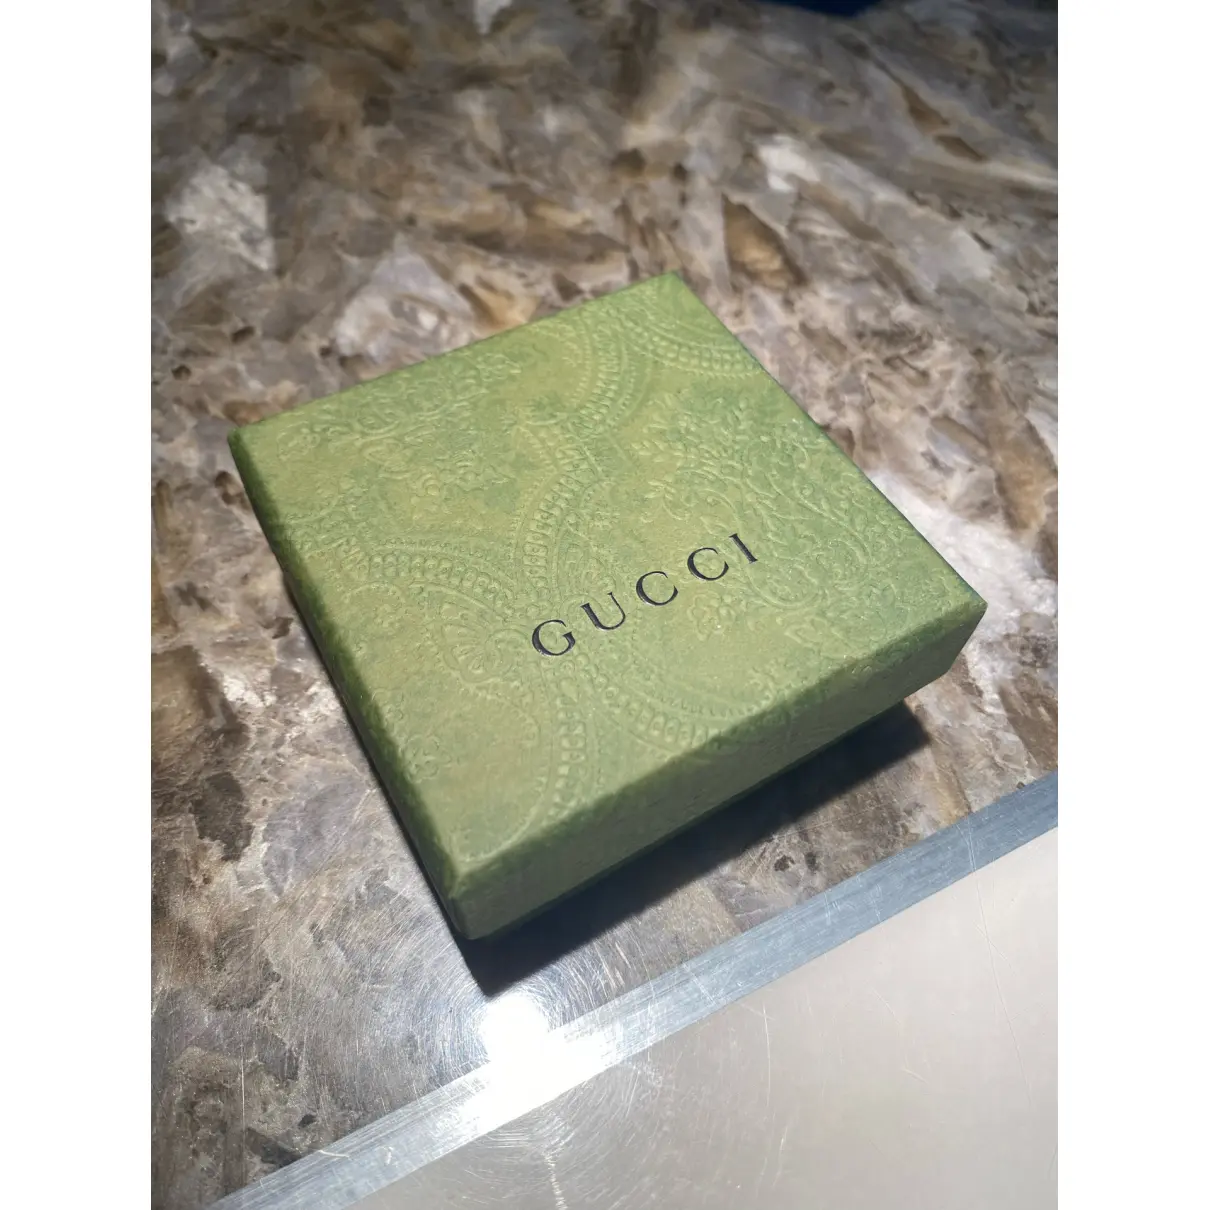 Buy Gucci Icon silver jewellery online